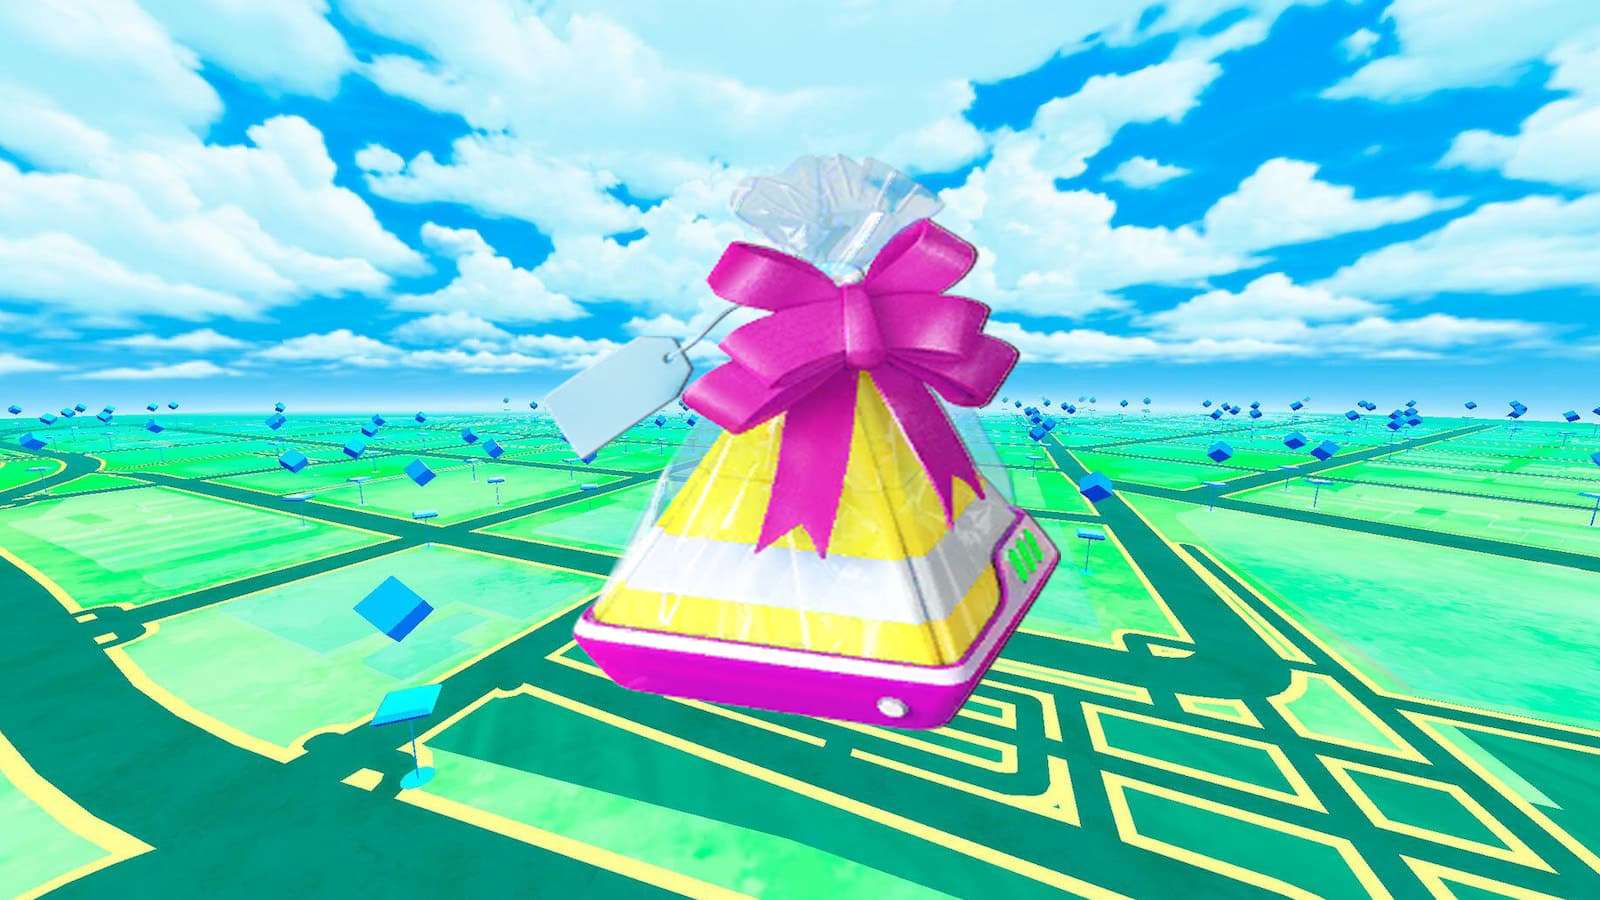 A gift item from Pokemon Go